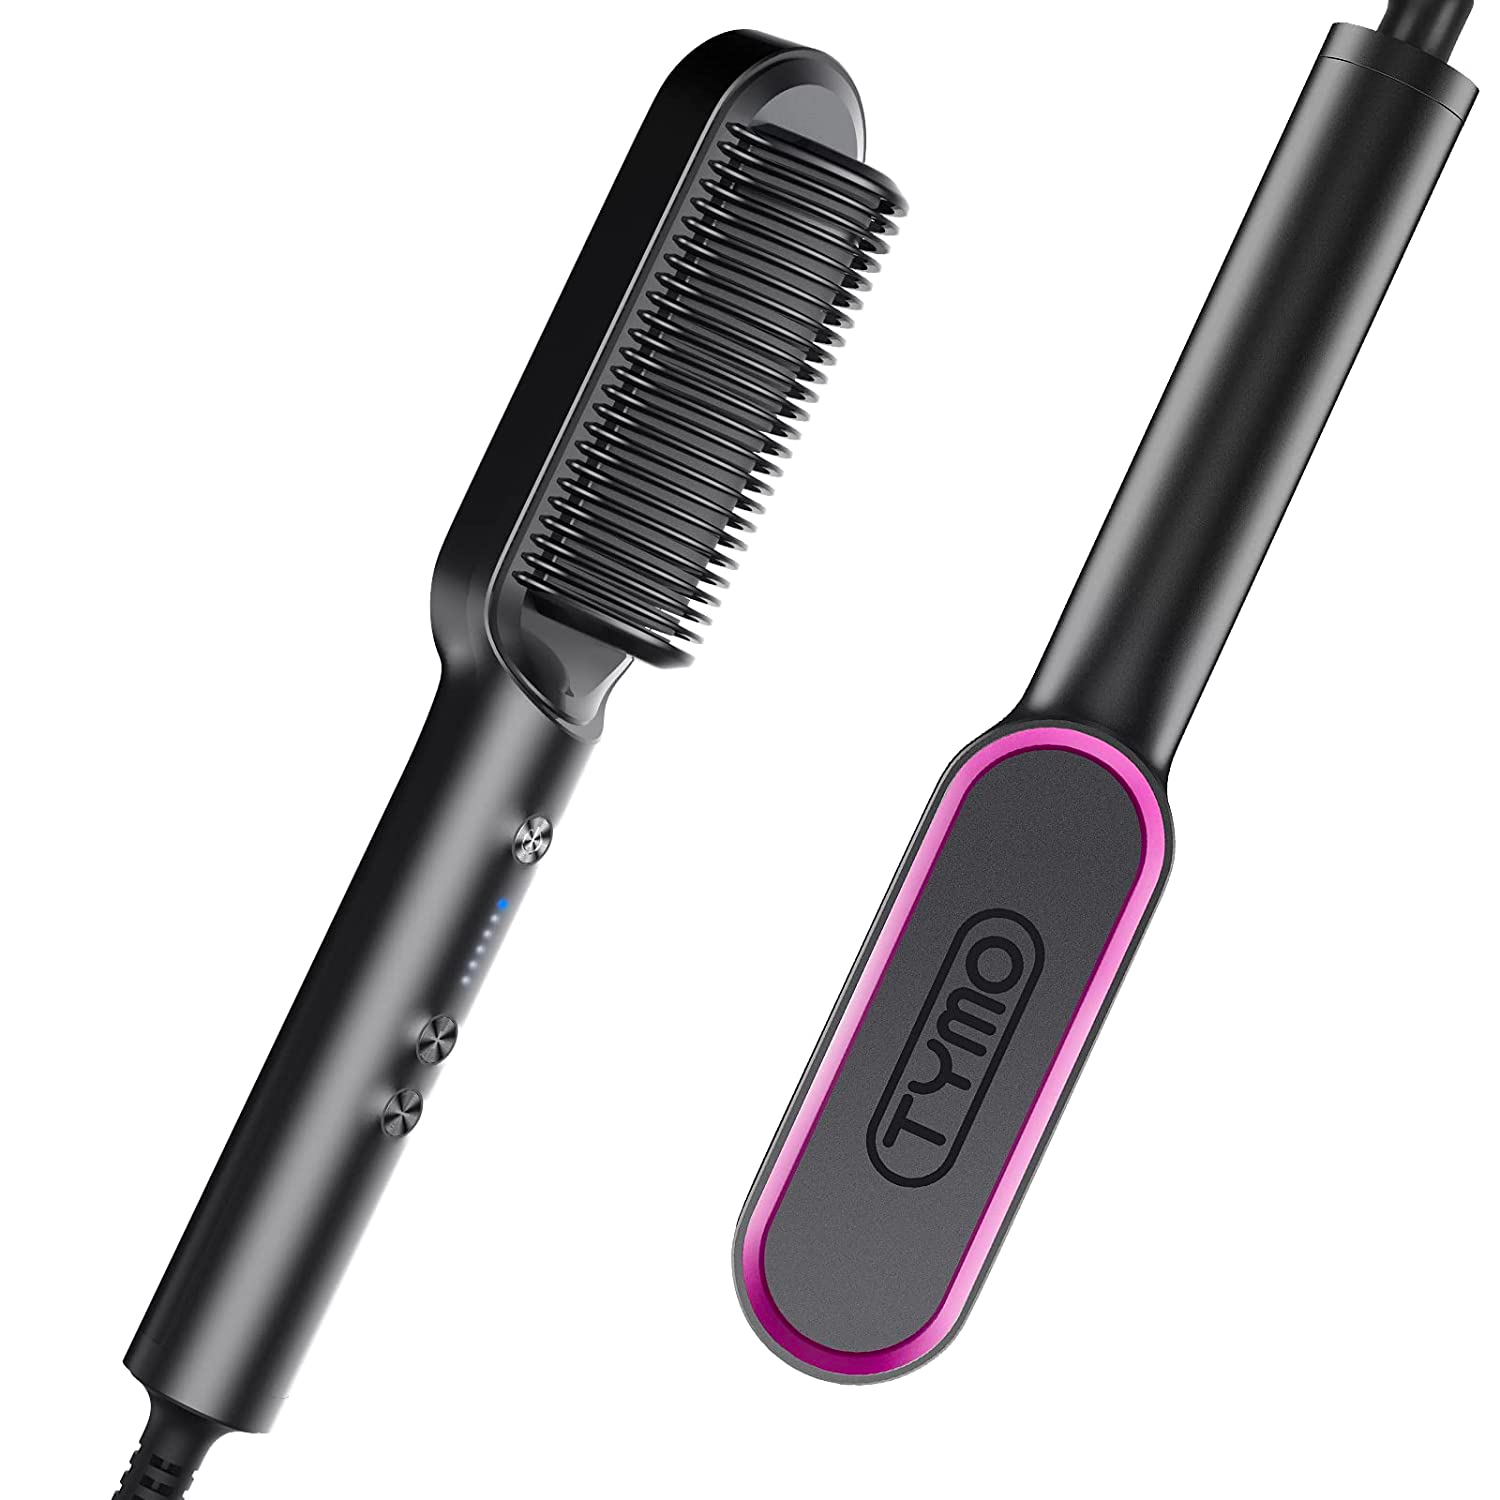 Revlon hair dryer brush vs the Dyson Airwrap the battle of the hair tools   Marie Claire UK